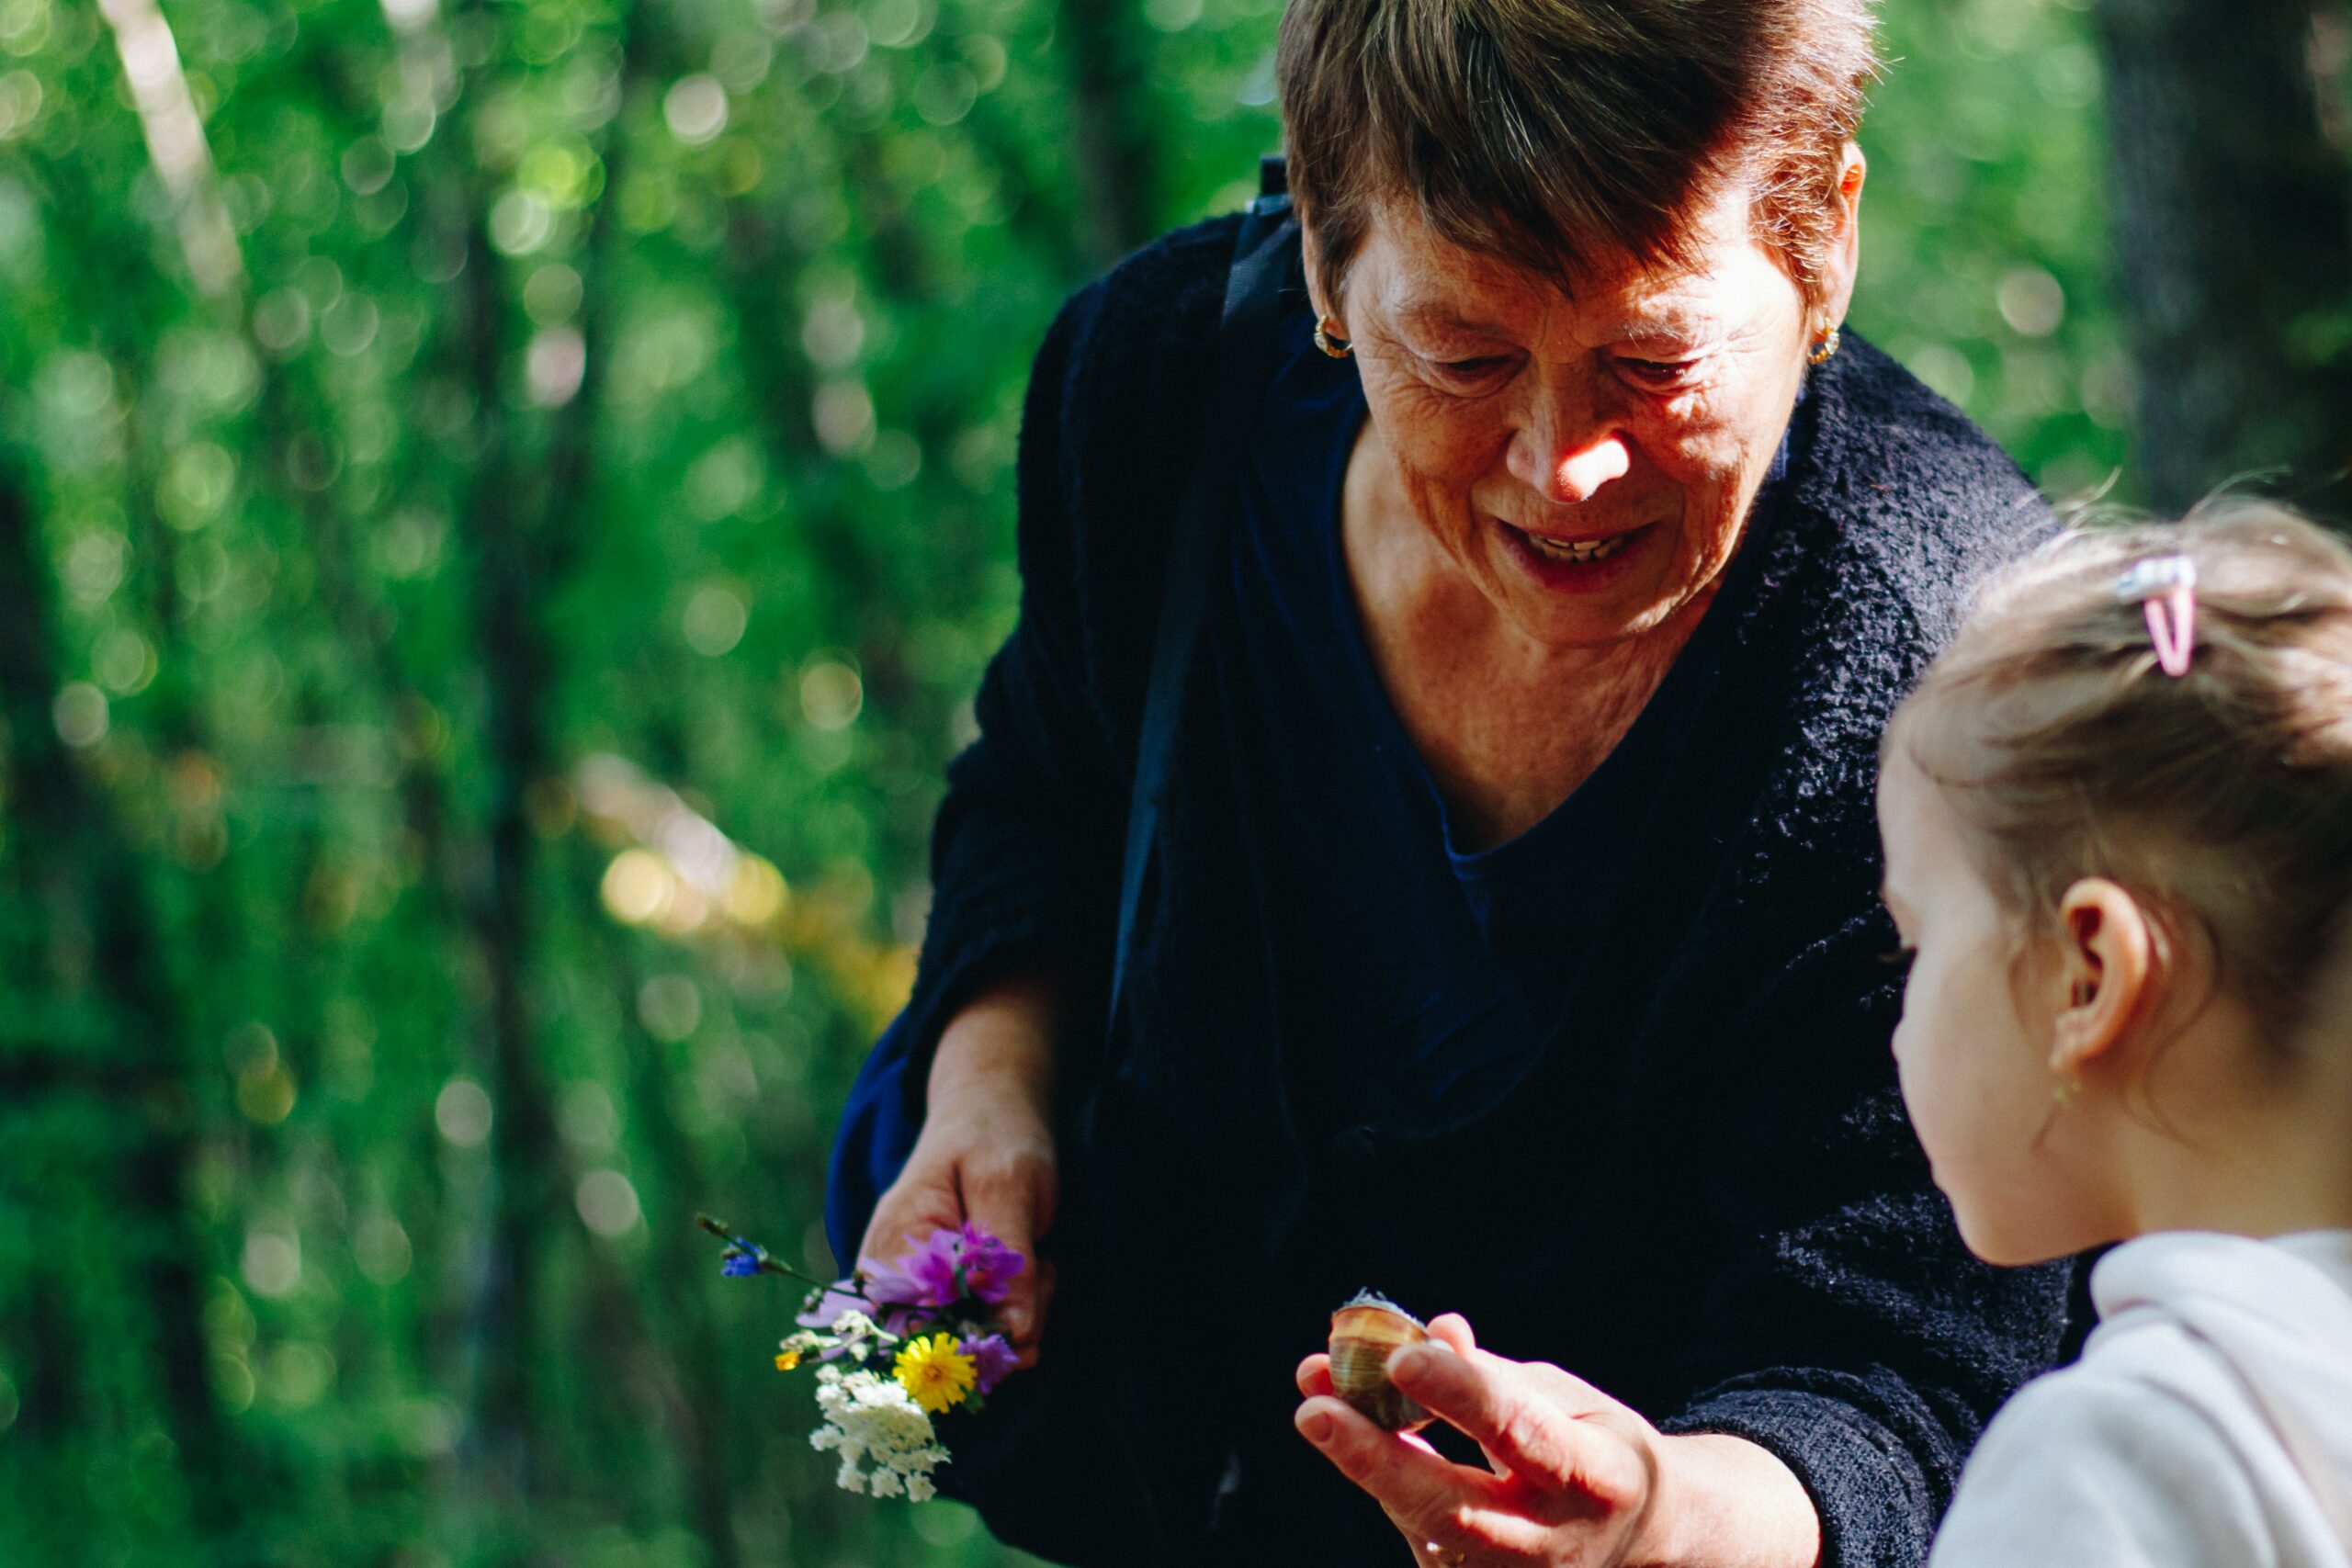 A grandmother showing a snail to her grandchild during a hike